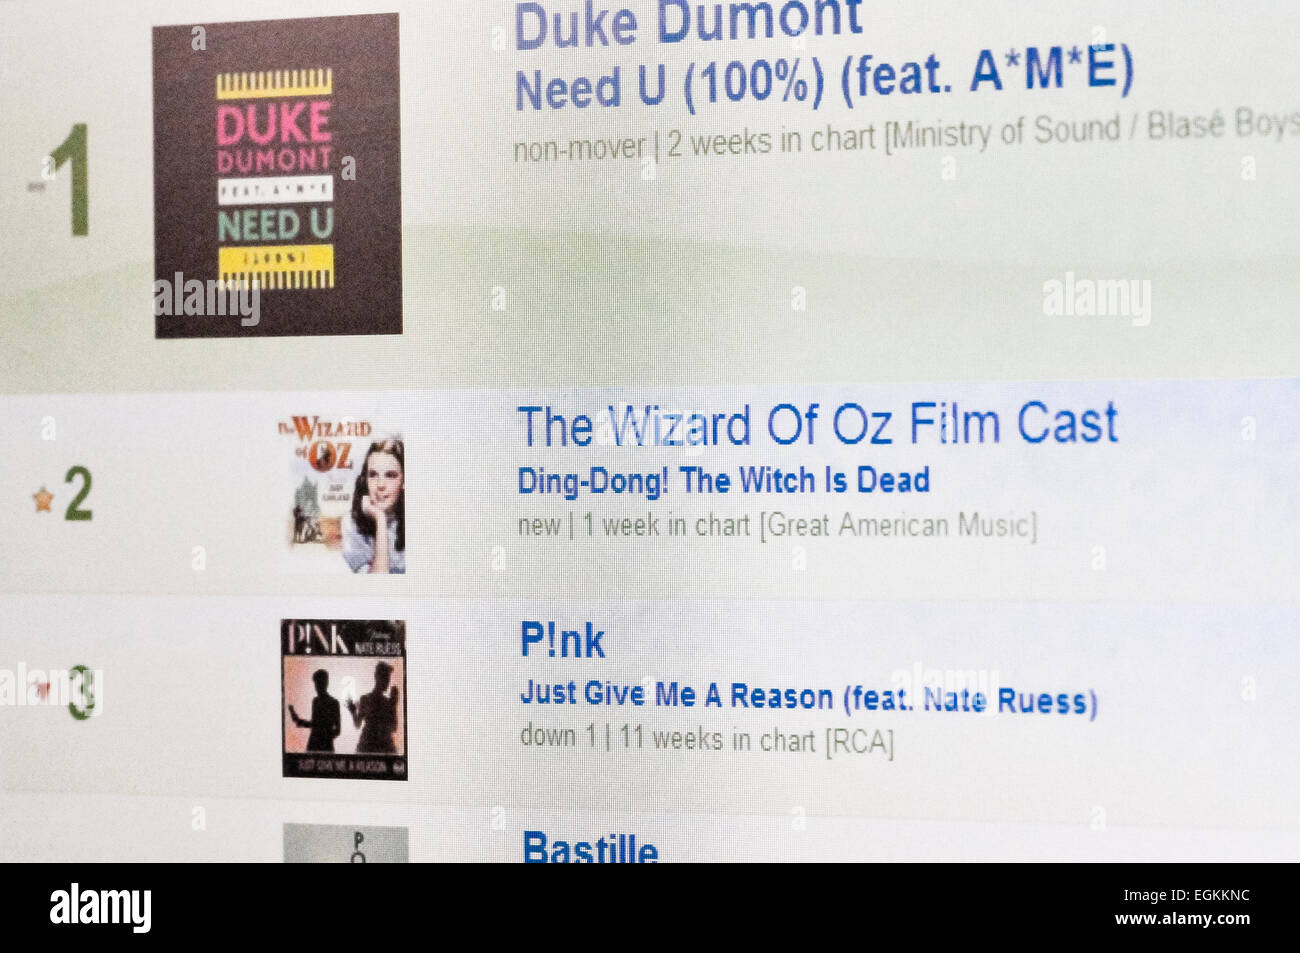 14th April 2013. UK. Screenshot from BBC Radio 1's website showing 'Ding Dong The Witch is Dead' from the 1939 film 'The Wizard of Oz' reached number 2 in the UK Official Top 40 chart.  The song was promoted on social media after the death of Margaret Thatcher.  The song 'I'm In Love with Margaret Thatcher' was at position 35. Stock Photo